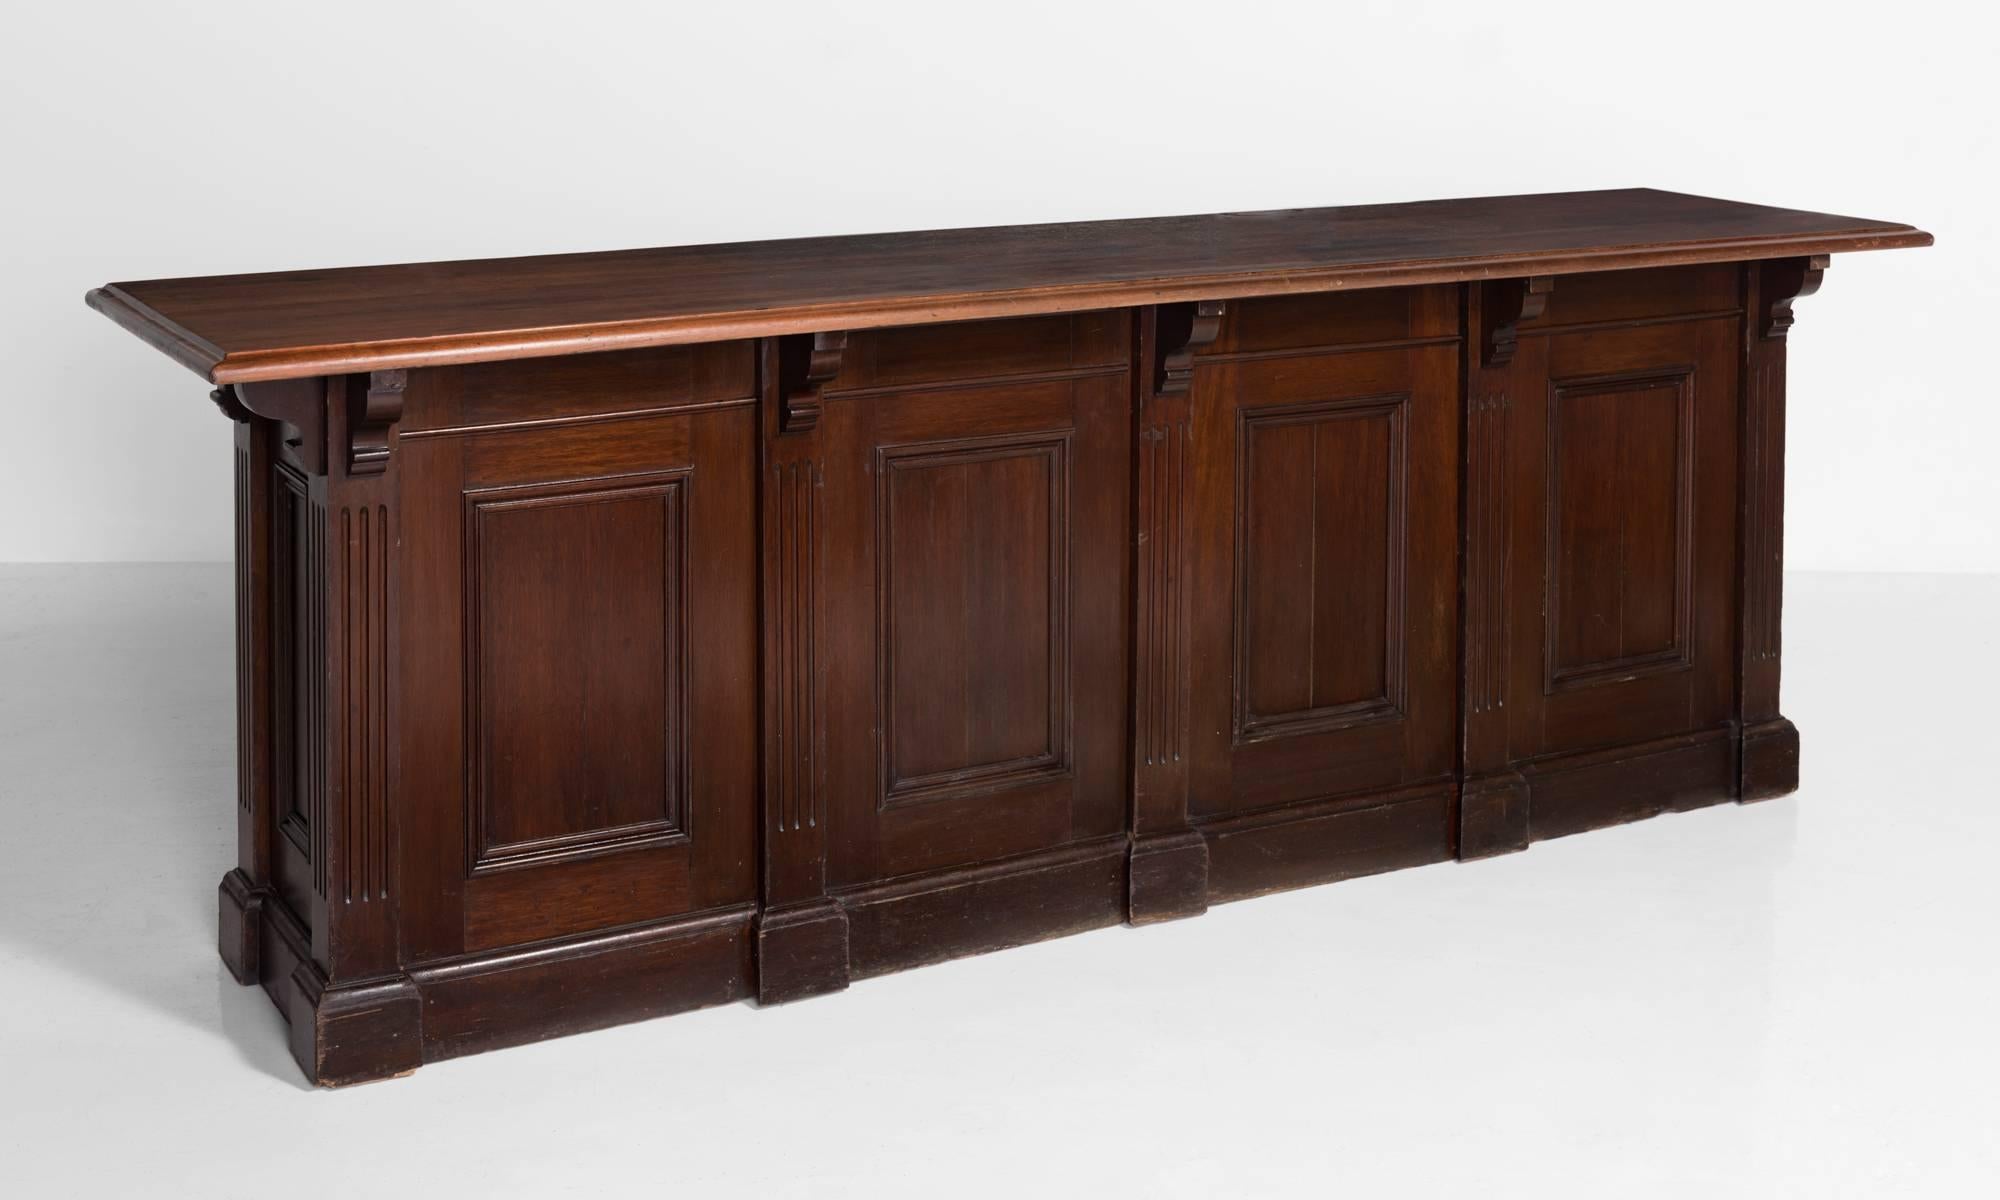 Mahogany & Oak Shop Counter, England, circa 1920

Amazing freestanding counter with mahogany show wood on the front and sides, with oak drawers and cupboard on the back.